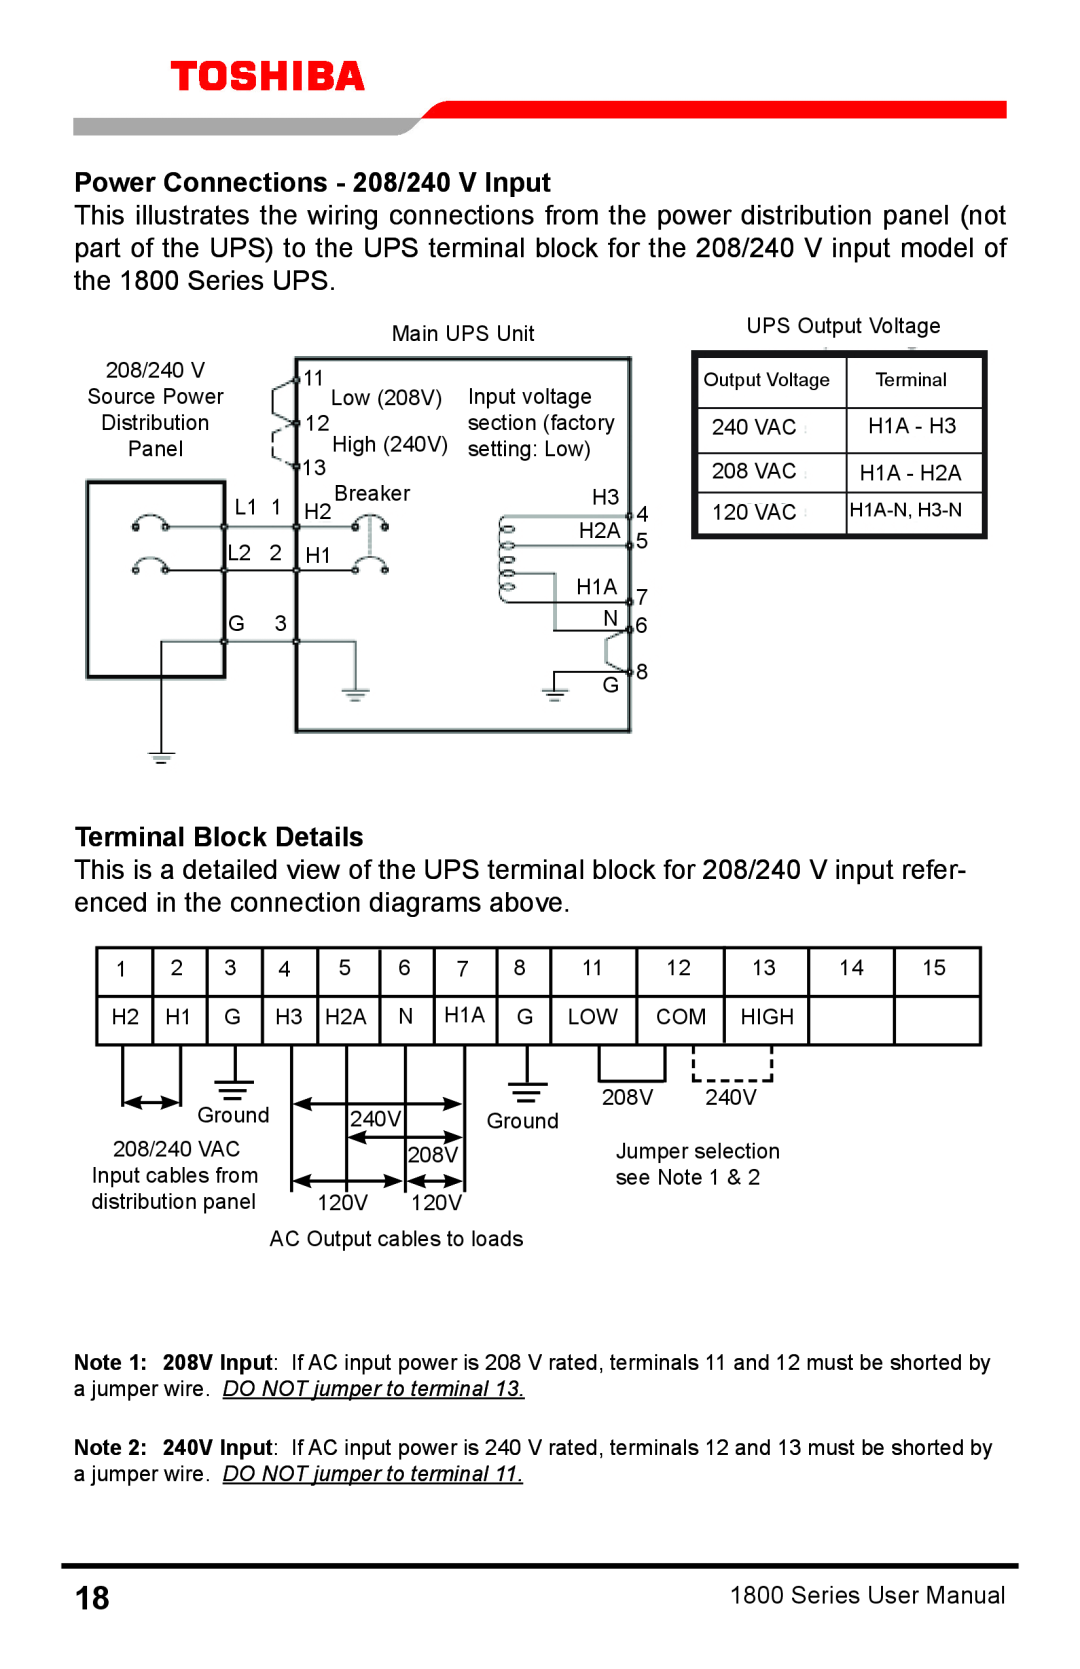 Toshiba 1800 manual Power Connections - 208/240 V Input, Terminal Block Details 